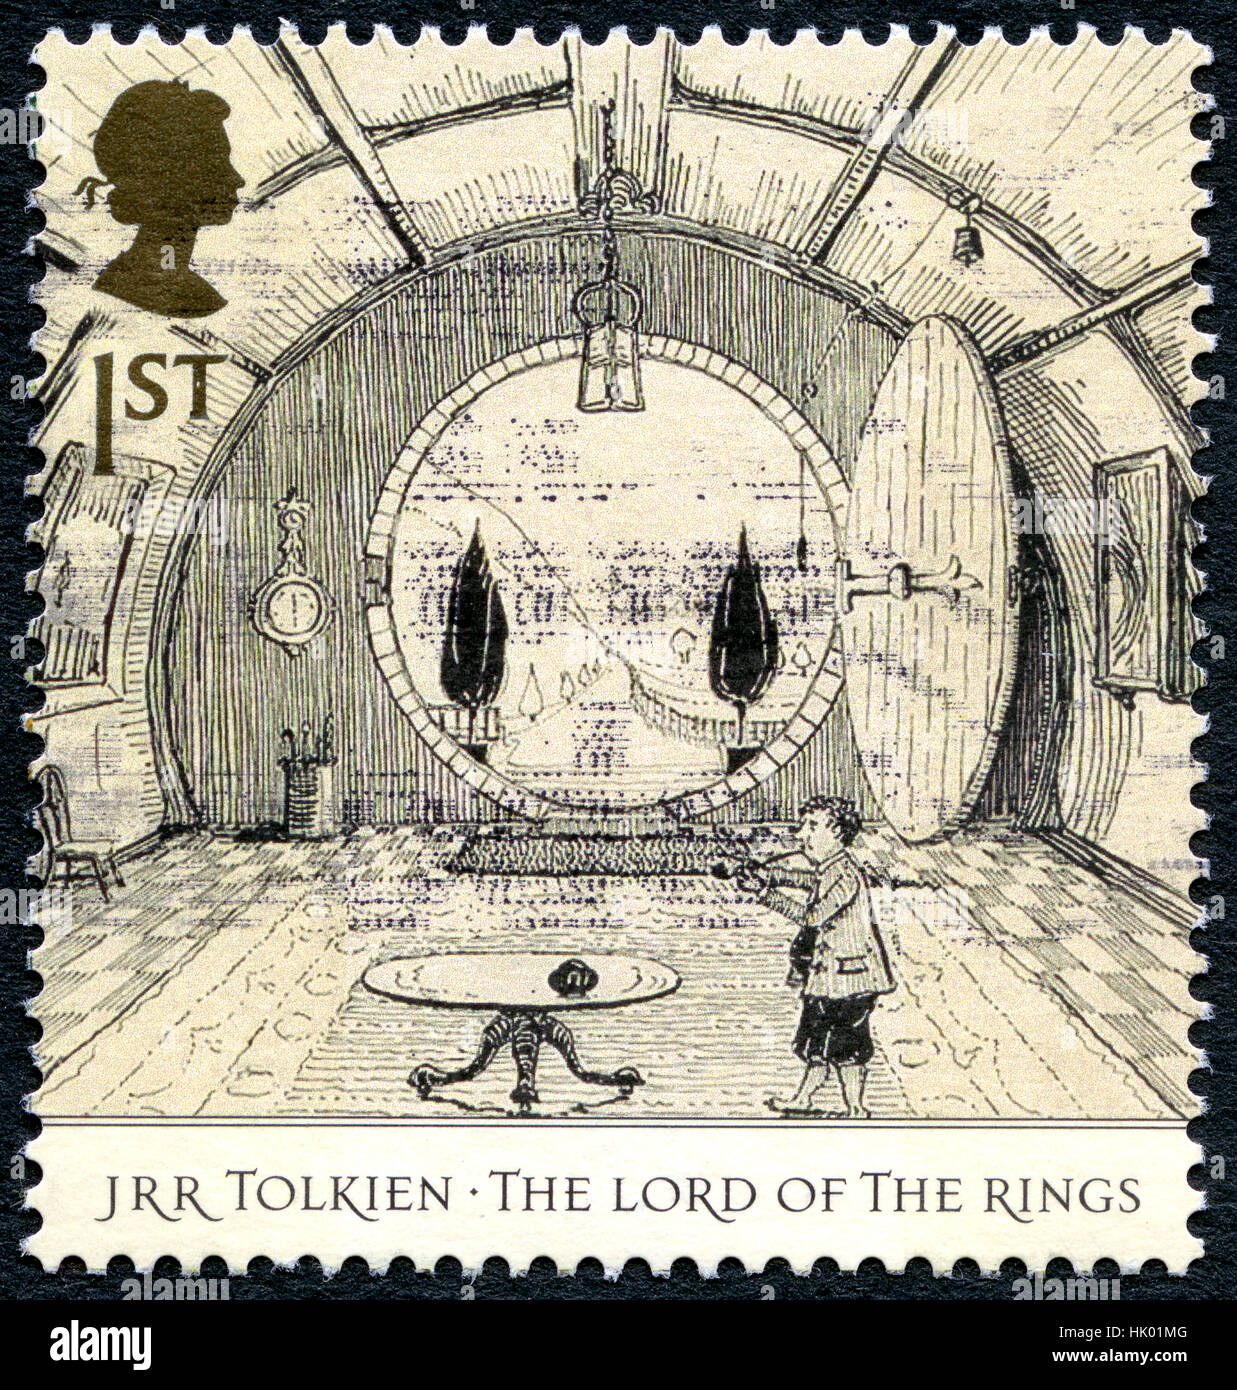 GREAT BRITAIN - CIRCA 2004: A used postage stamp from the UK, celebrating the epic fantasy The Lord of the Rings novels by J R R Tolkien, circa 2004. Stock Photo